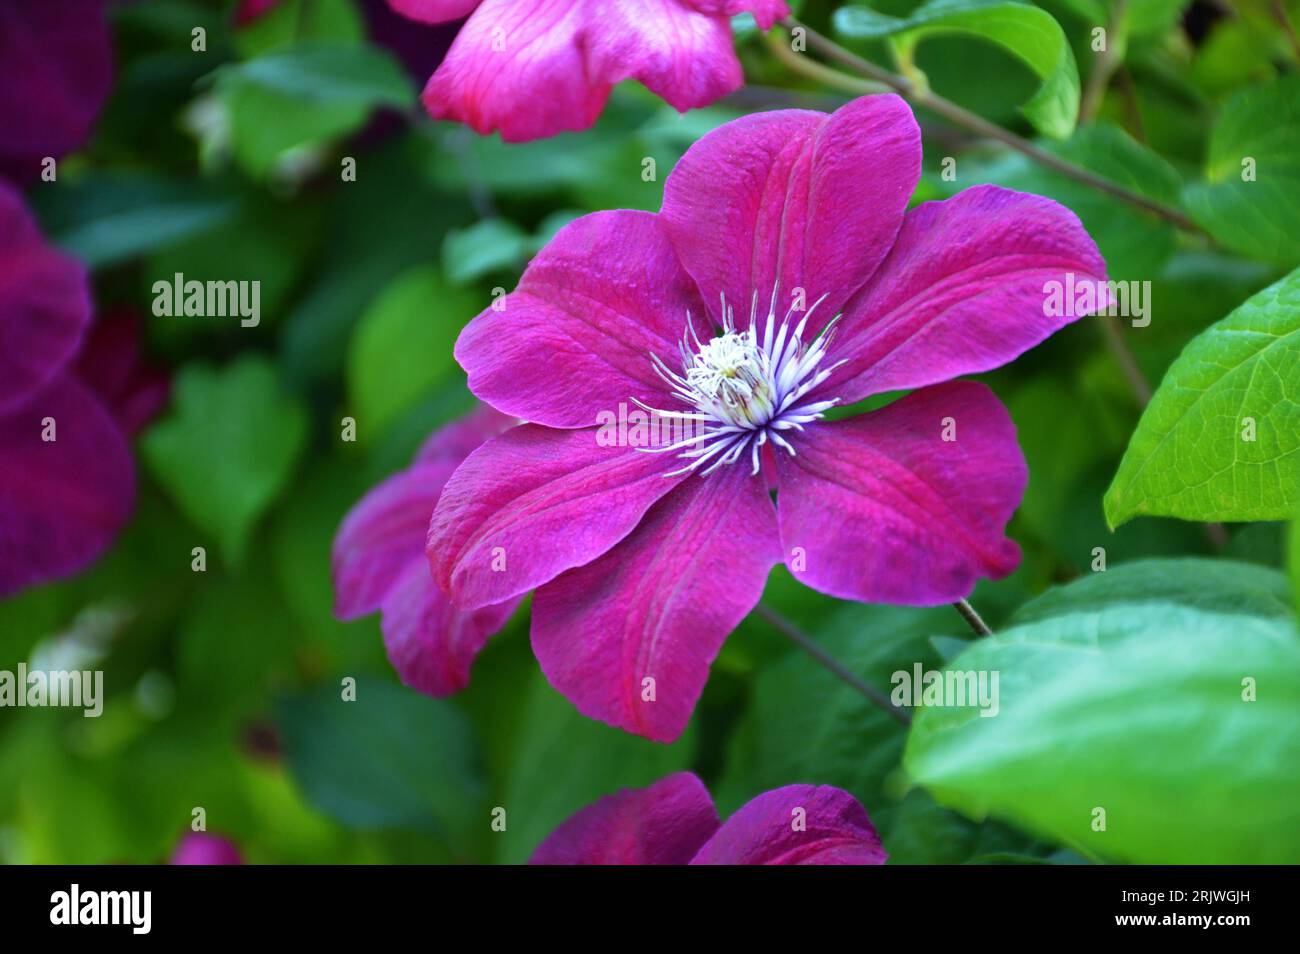 Clematis flower plant blooming in the garden Stock Photo